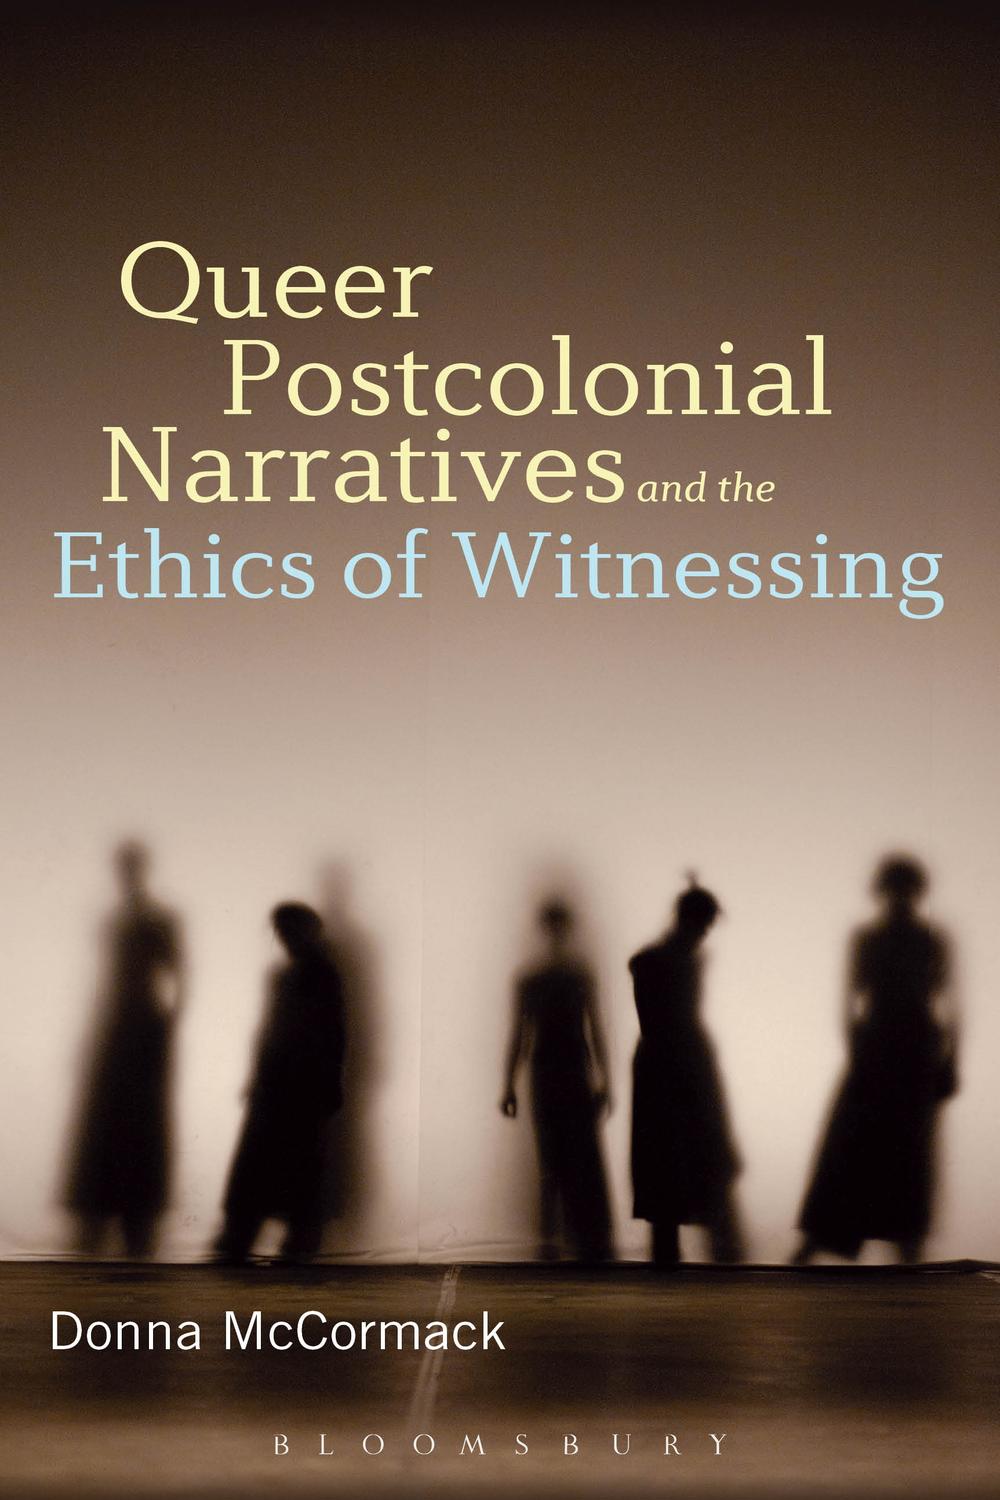 Queer Postcolonial Narratives and the Ethics of Witnessing - Donna McCormack